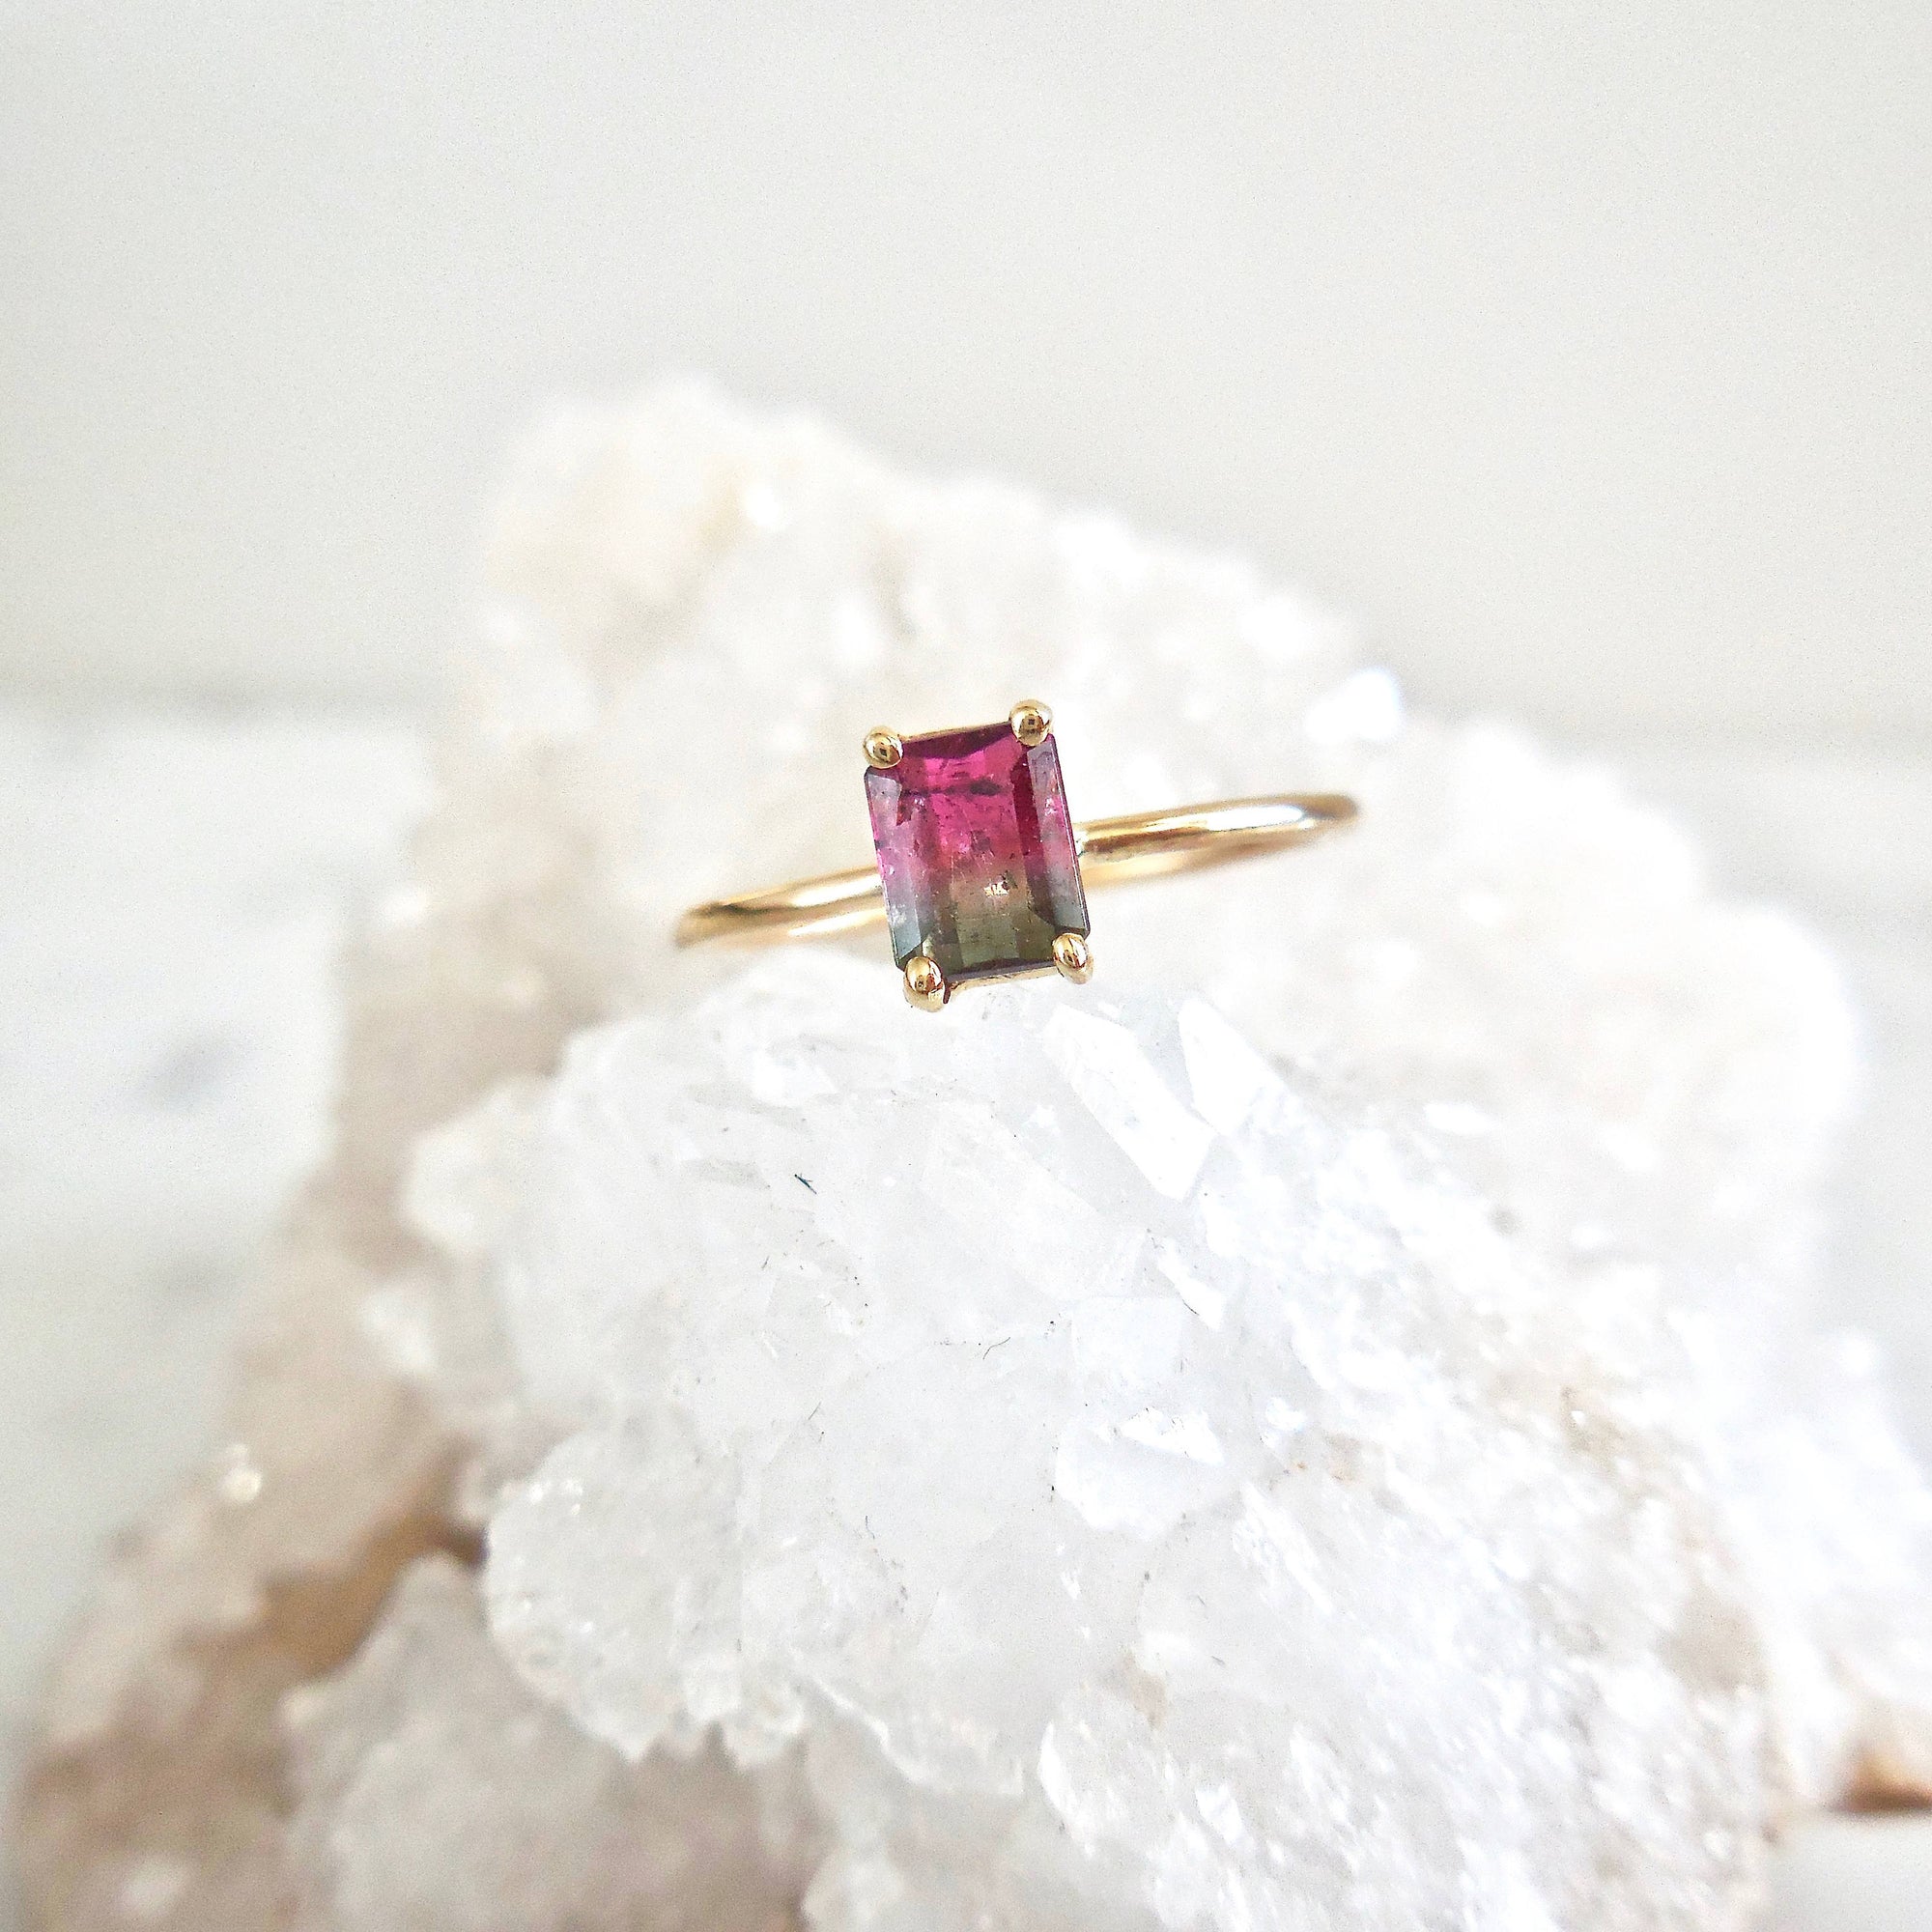 Amazon.com: Watermelon Tourmaline Ring, Tourmaline Quartz Silver Ring,  Octagon Watermelon Tourmaline, Bi Color Stone Ring, 925 Silver Prong Set  Ring, Engagement Gift Ring (12) : Handmade Products